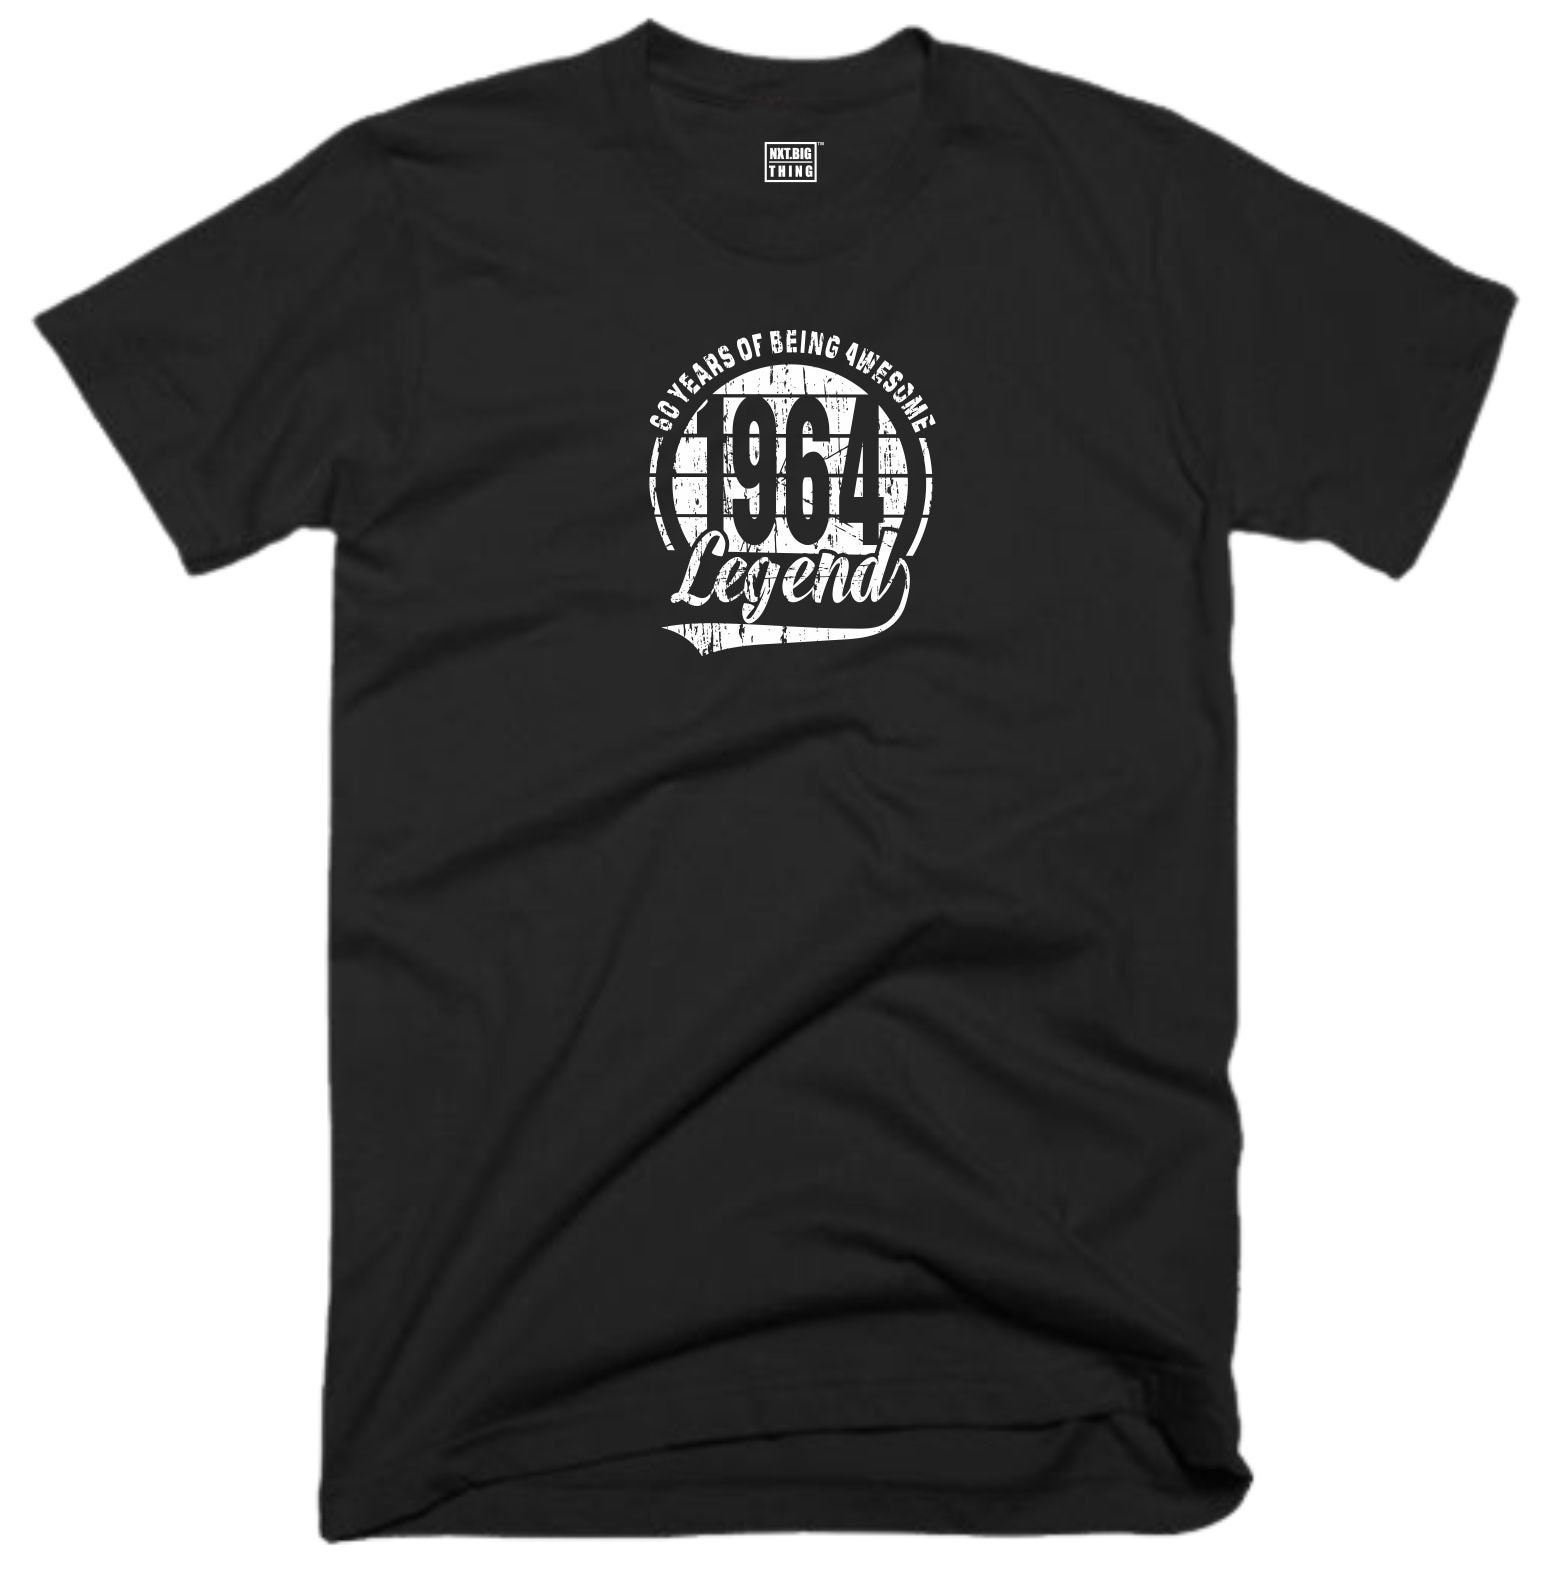 60th Birthday T Shirt 60 Years of Being Awesome Legend Born in - Etsy